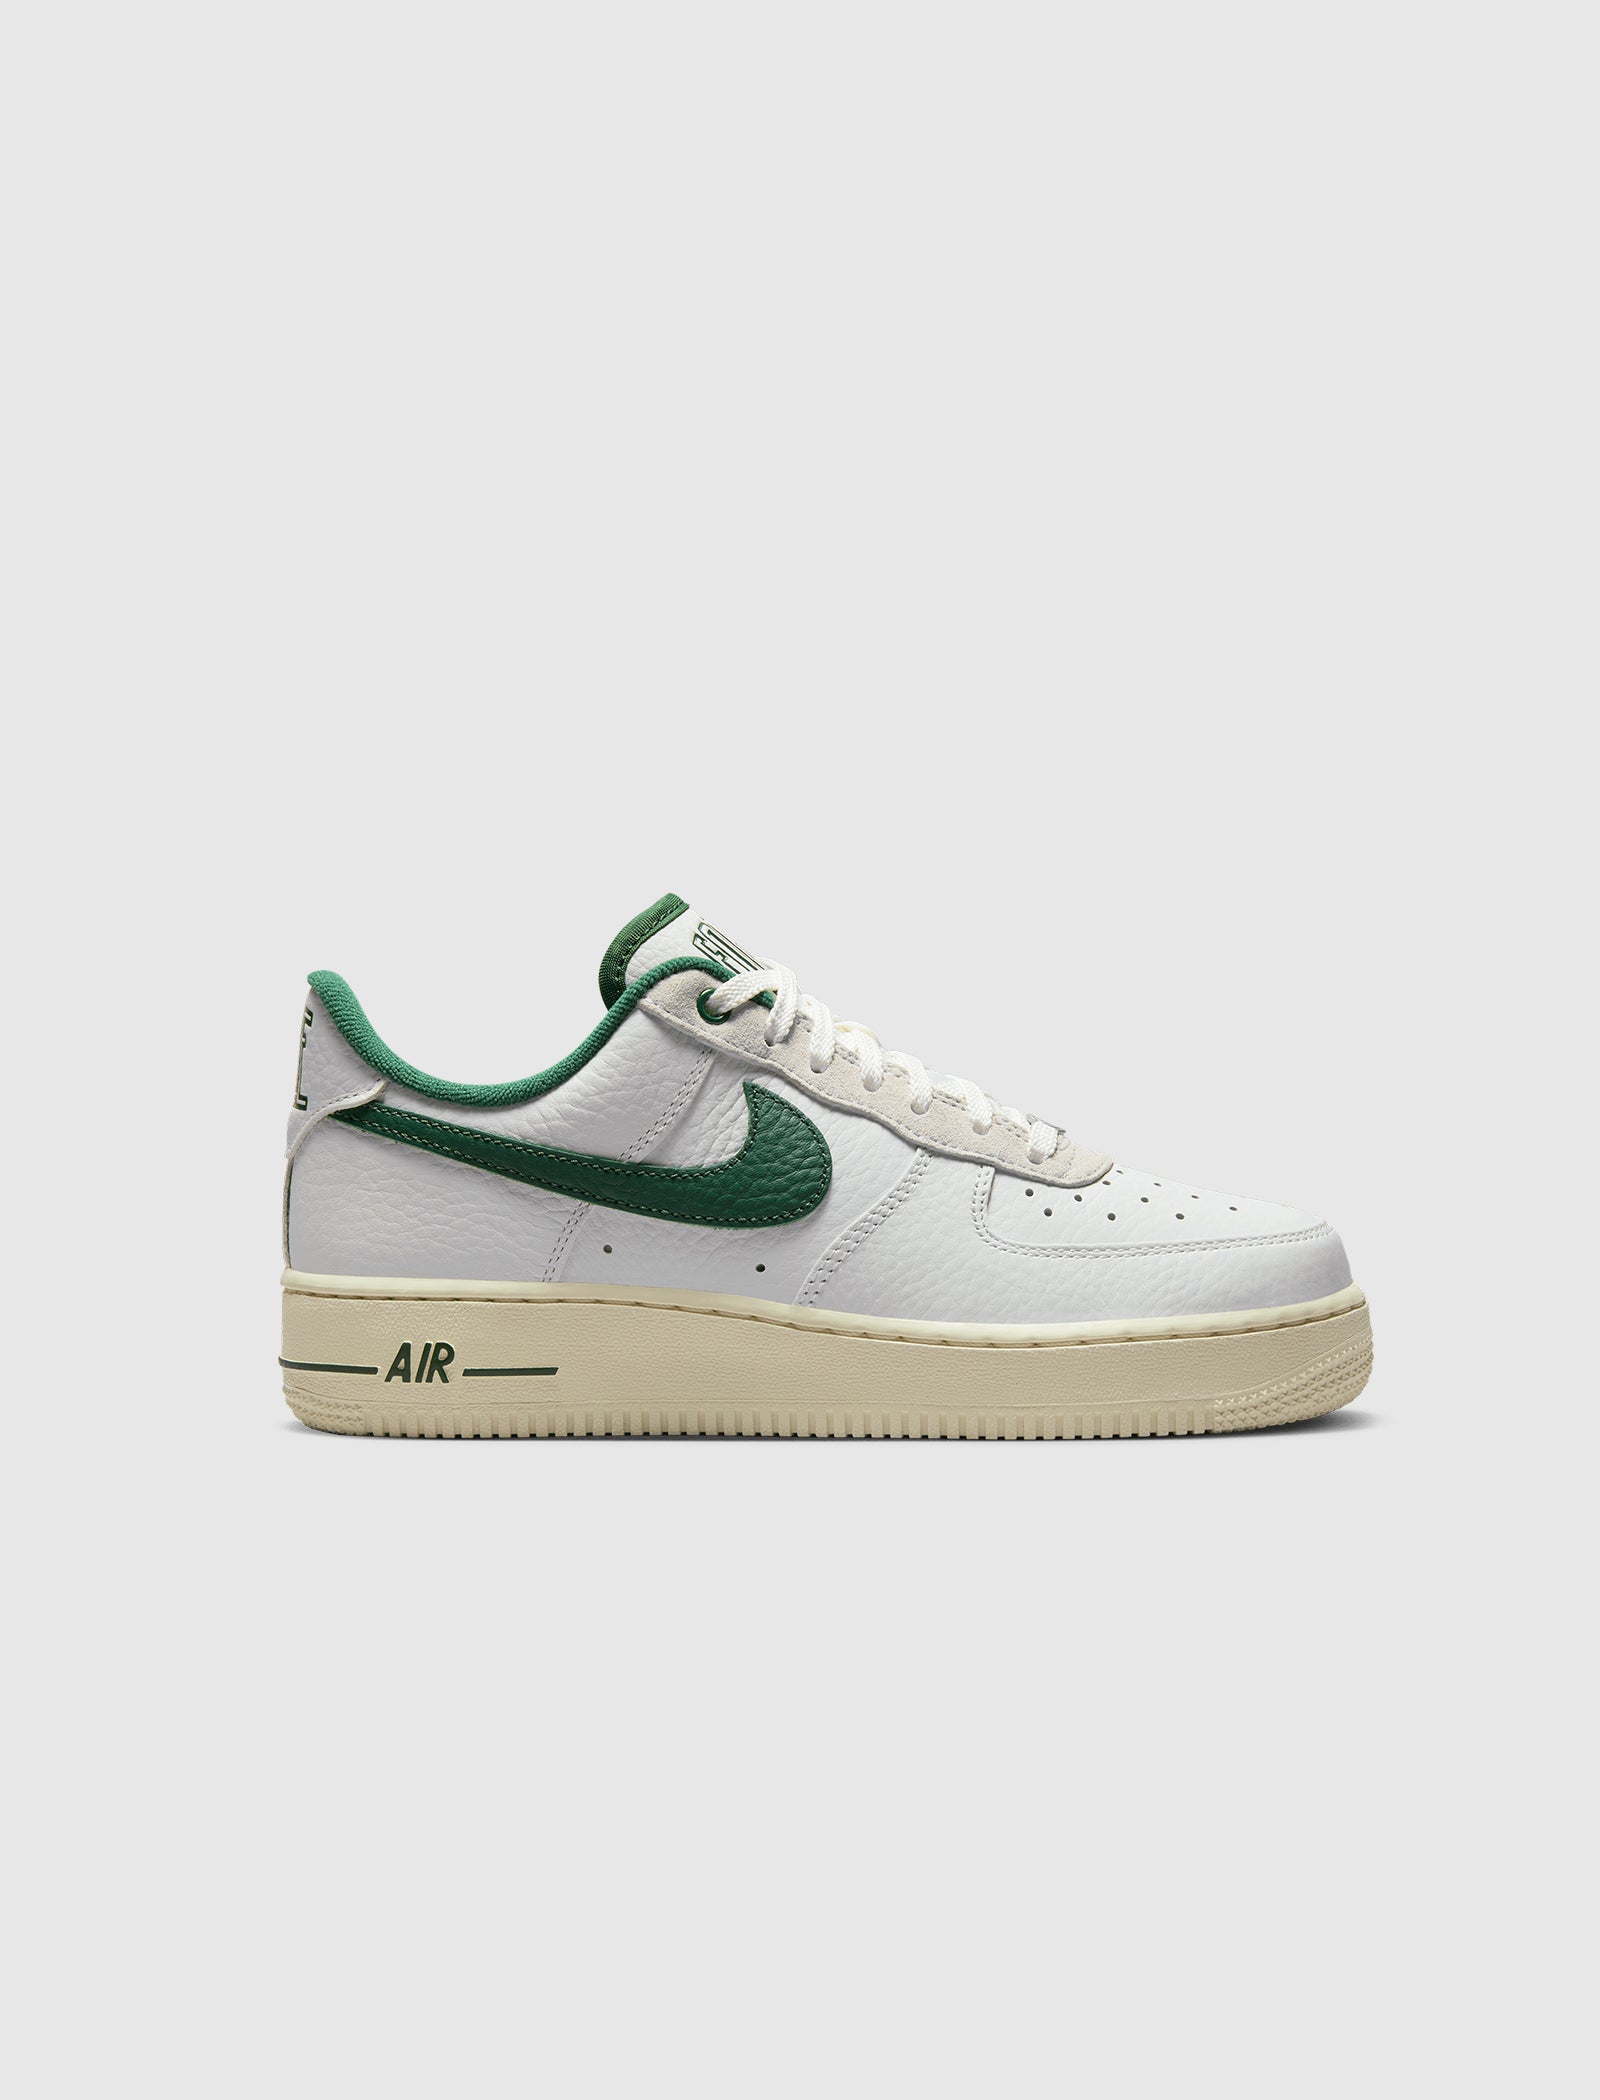 WOMEN'S AIR FORCE 1 '07 LX COMMAND FORCE 